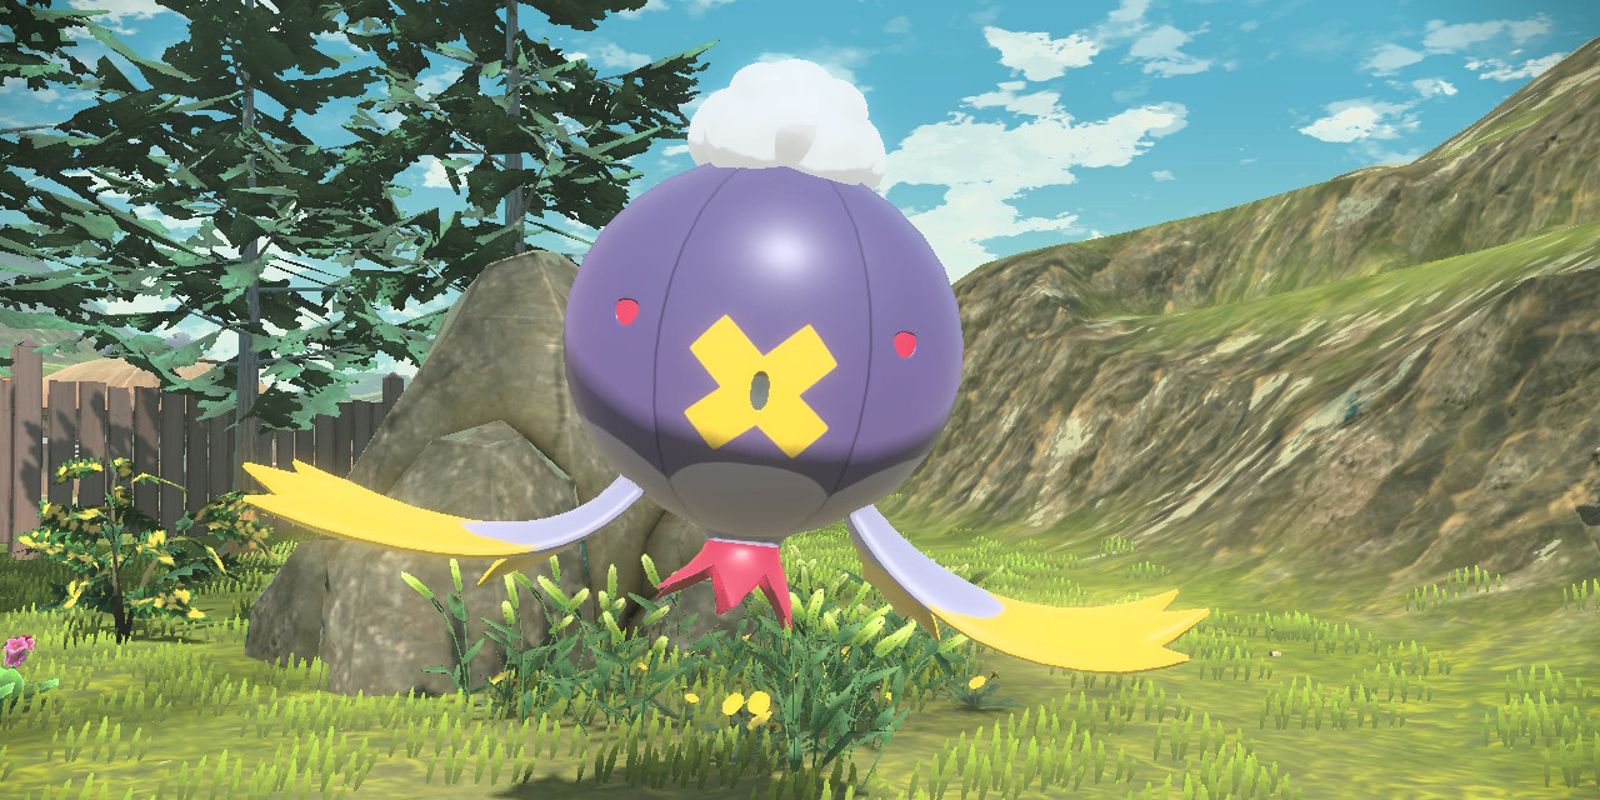 Trainers can catch or evolve Drifblim in Pokemon Legends: Arceus